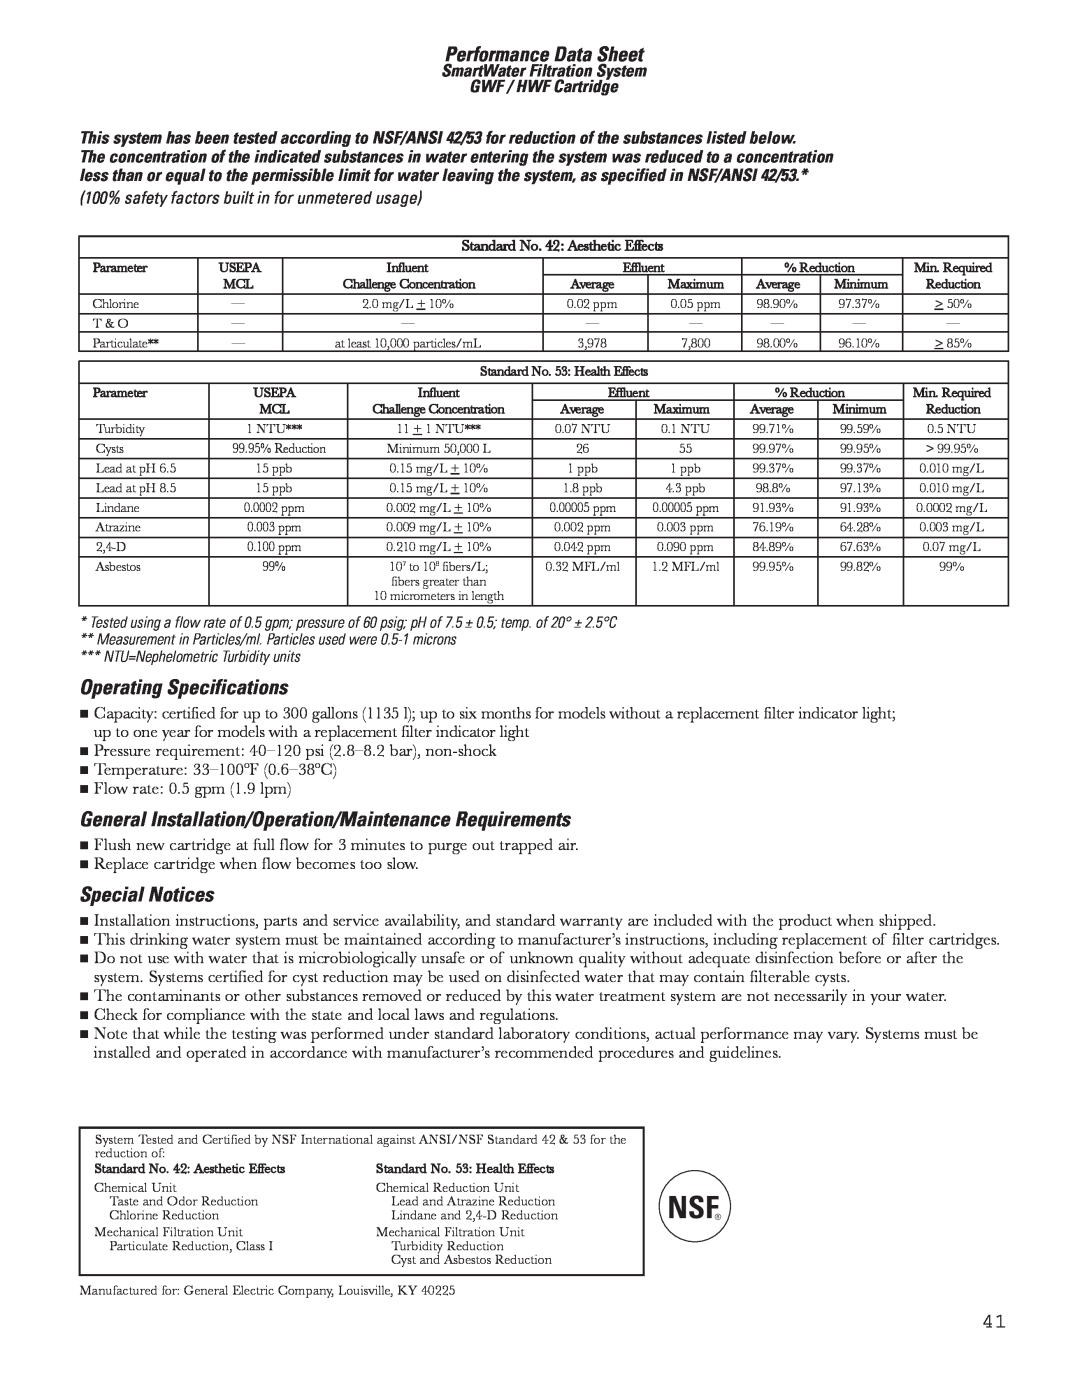 GE 200D8074P043 Performance Data Sheet, Operating Specifications, General Installation/Operation/Maintenance Requirements 